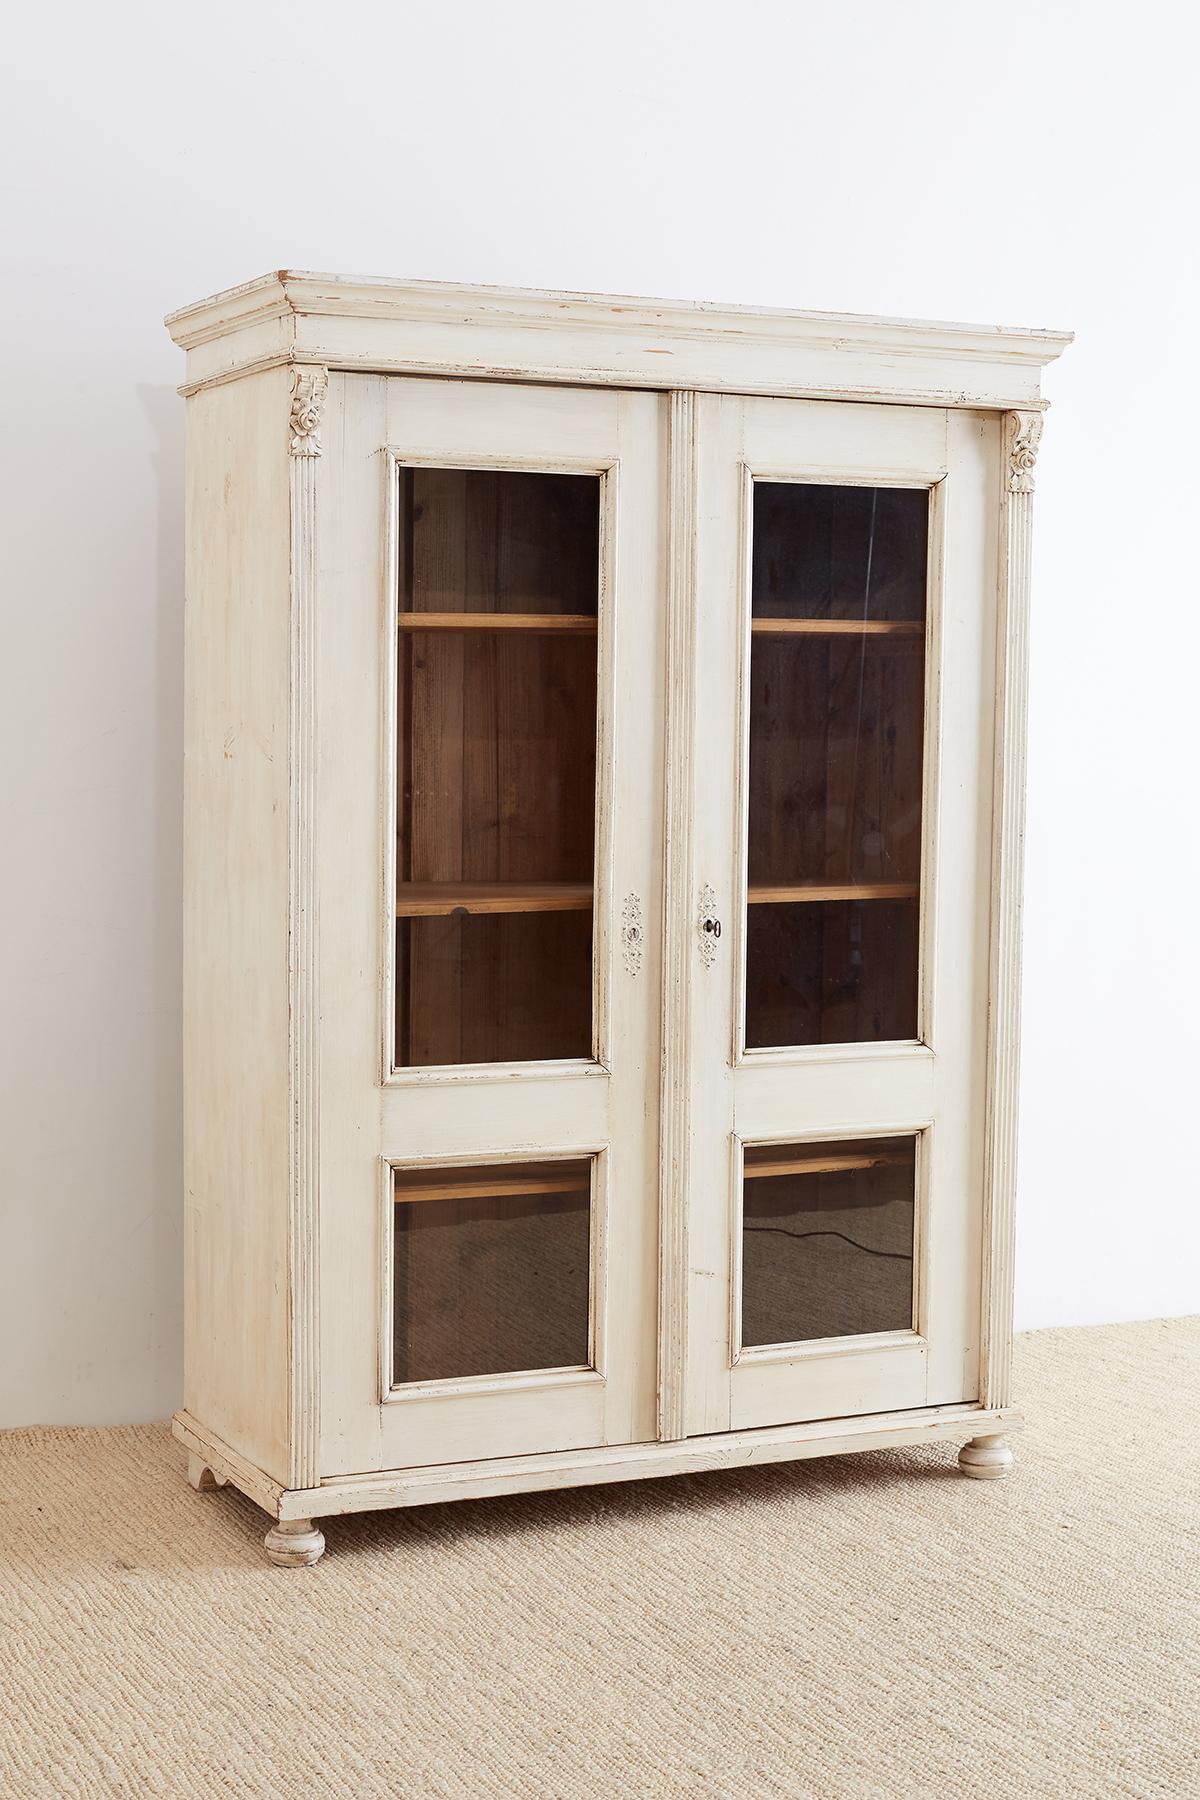 Gorgeous painted pine bibliotheque bookcase or linen press made in the neoclassical Swedish Gustavian style. Features a two glazed door case with fluted pilasters on each side supporting the corniced top. The interior is fitted with four shelves and